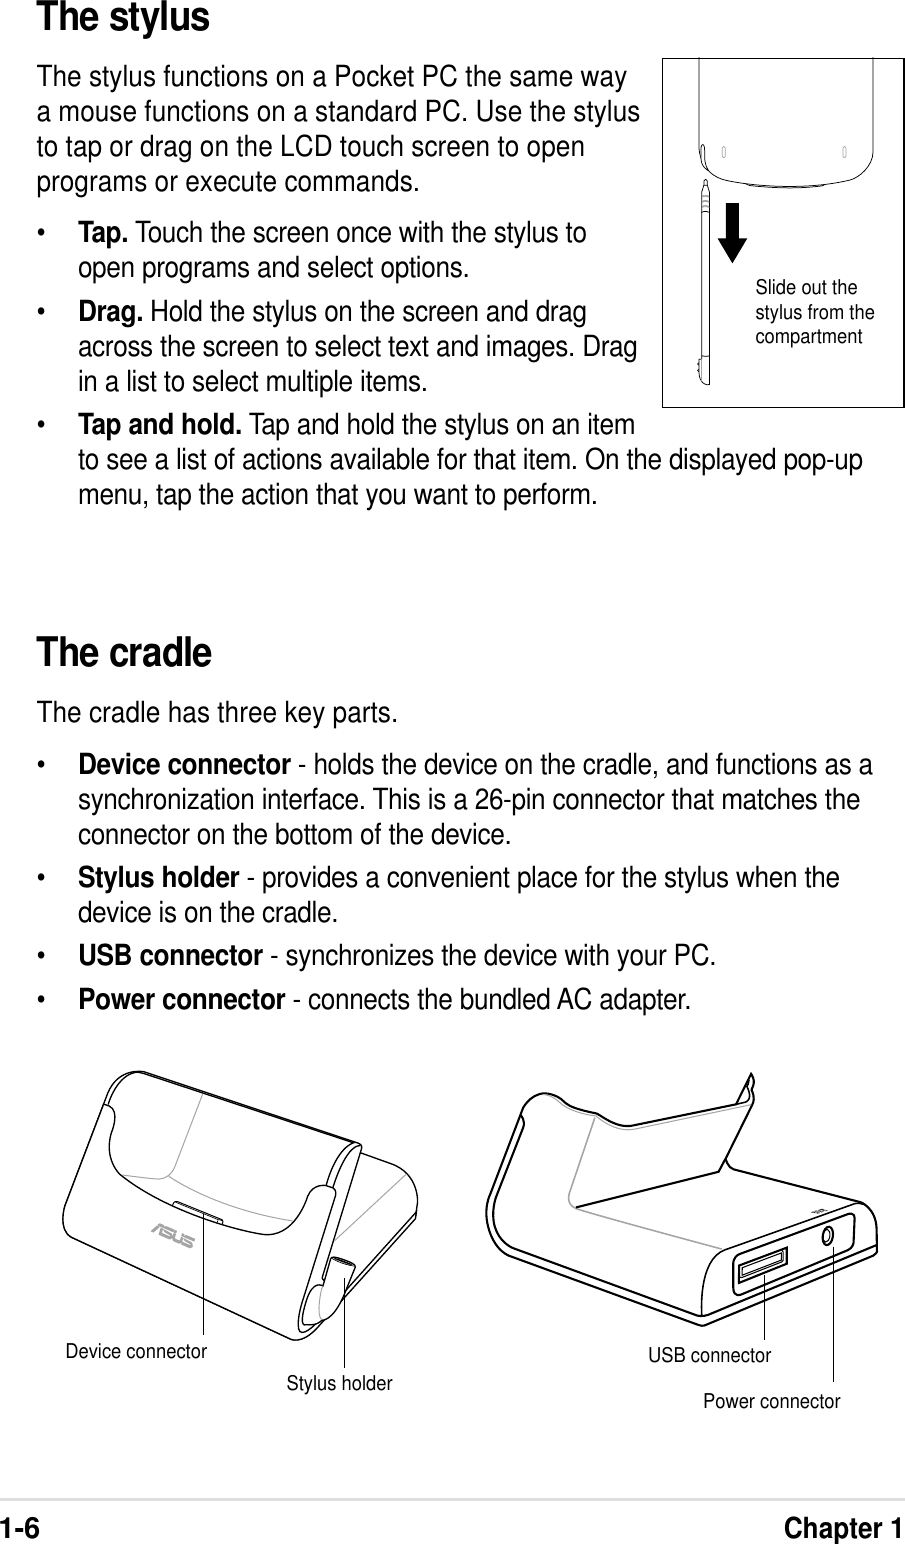 1-6Chapter 1The cradleThe cradle has three key parts.•Device connector - holds the device on the cradle, and functions as asynchronization interface. This is a 26-pin connector that matches theconnector on the bottom of the device.•Stylus holder - provides a convenient place for the stylus when thedevice is on the cradle.•USB connector - synchronizes the device with your PC.•Power connector - connects the bundled AC adapter.The stylusThe stylus functions on a Pocket PC the same waya mouse functions on a standard PC. Use the stylusto tap or drag on the LCD touch screen to openprograms or execute commands.•Tap. Touch the screen once with the stylus toopen programs and select options.•Drag. Hold the stylus on the screen and dragacross the screen to select text and images. Dragin a list to select multiple items.•Tap and hold. Tap and hold the stylus on an itemto see a list of actions available for that item. On the displayed pop-upmenu, tap the action that you want to perform.Device connector USB connectorPower connectorStylus holderSlide out thestylus from thecompartment